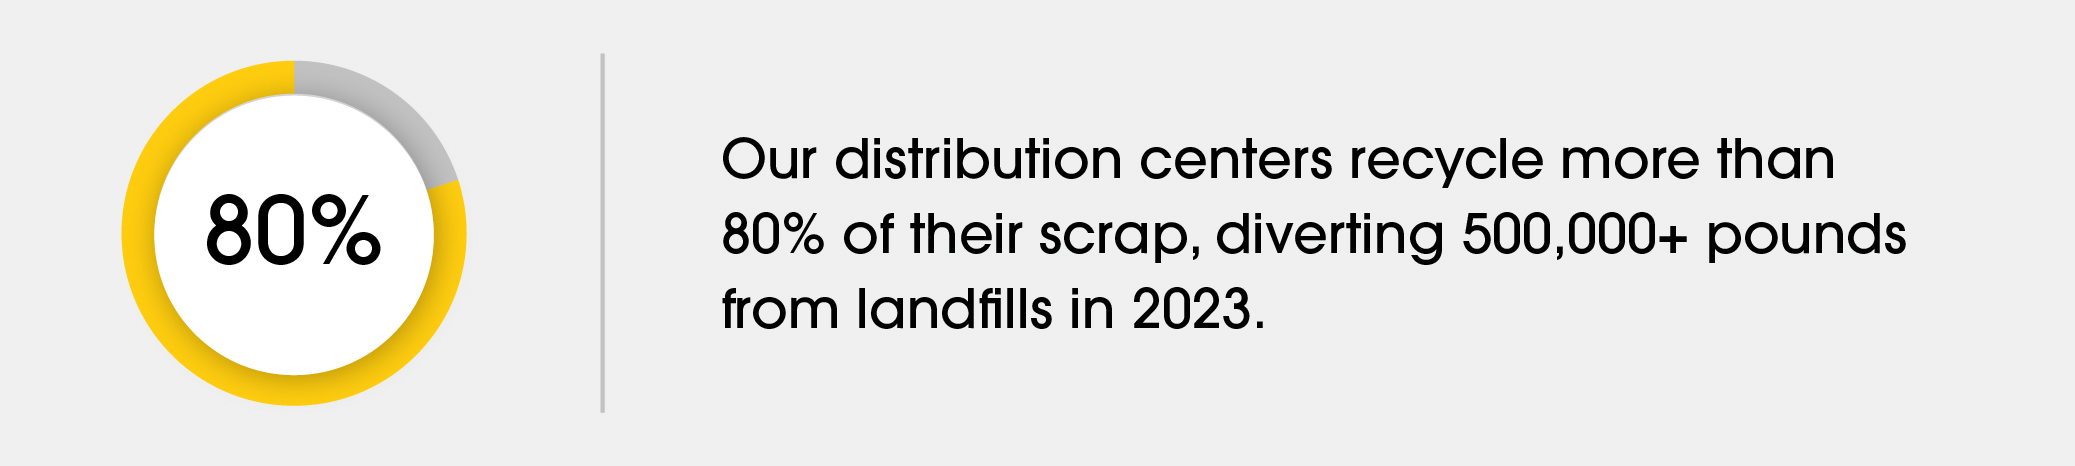 80% - Our distribution centers recycle more than 80% of their scrap, diverting 500,000+ pounds from landfills in 2023